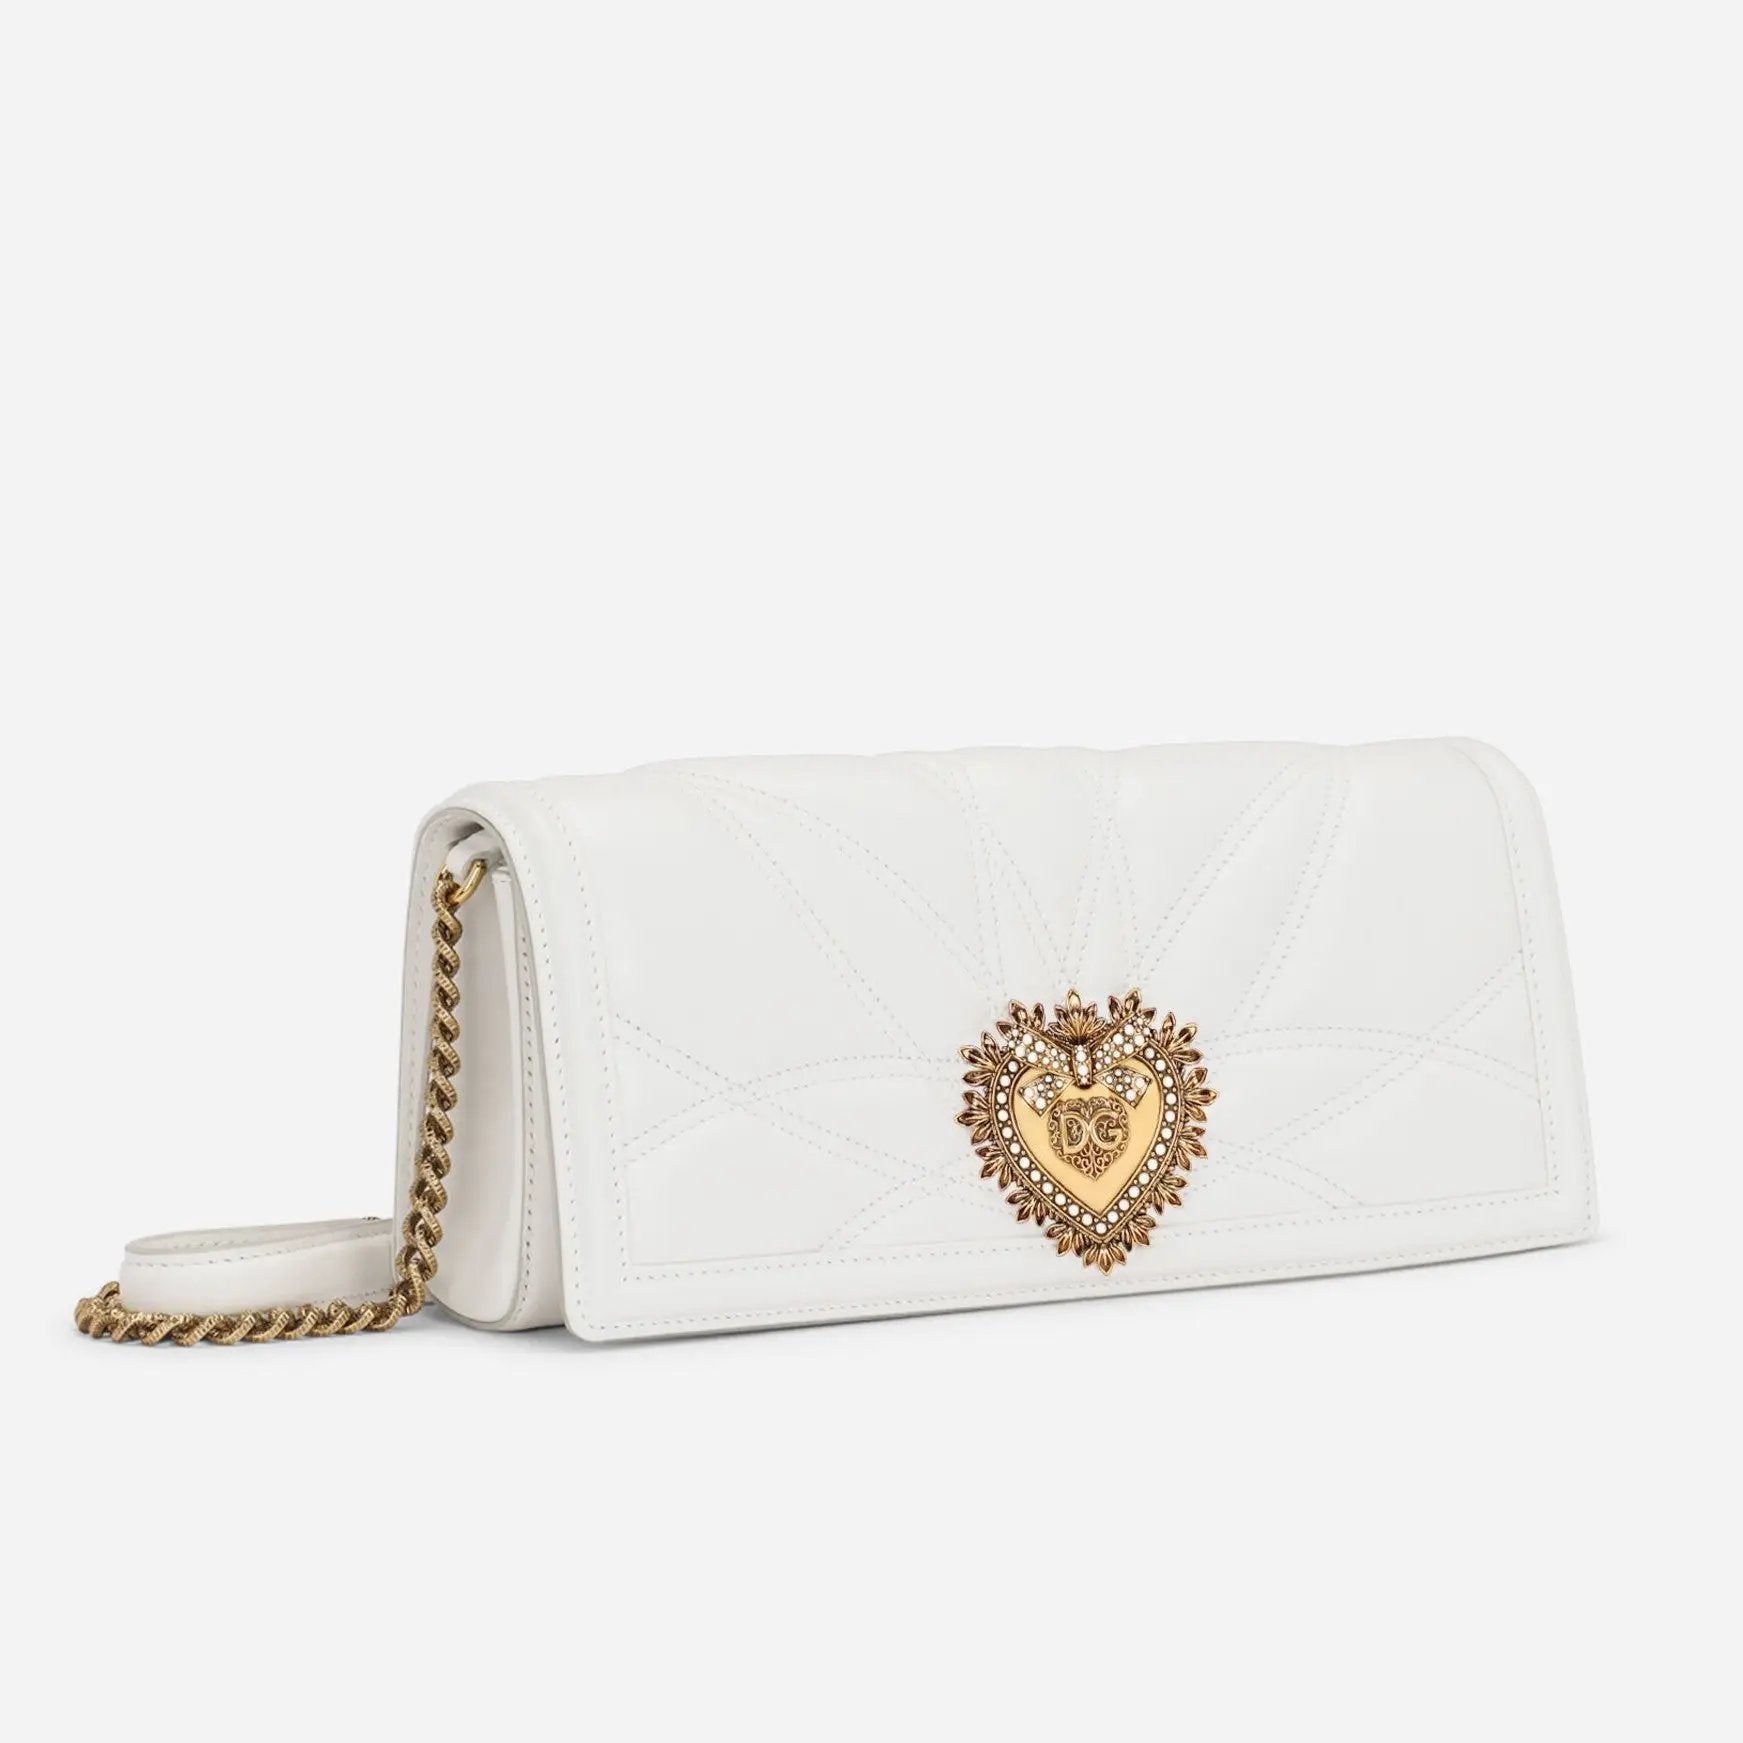 Devotion Quilted Leather Baguette Bag in White Handbags DOLCE & GABBANA - LOLAMIR